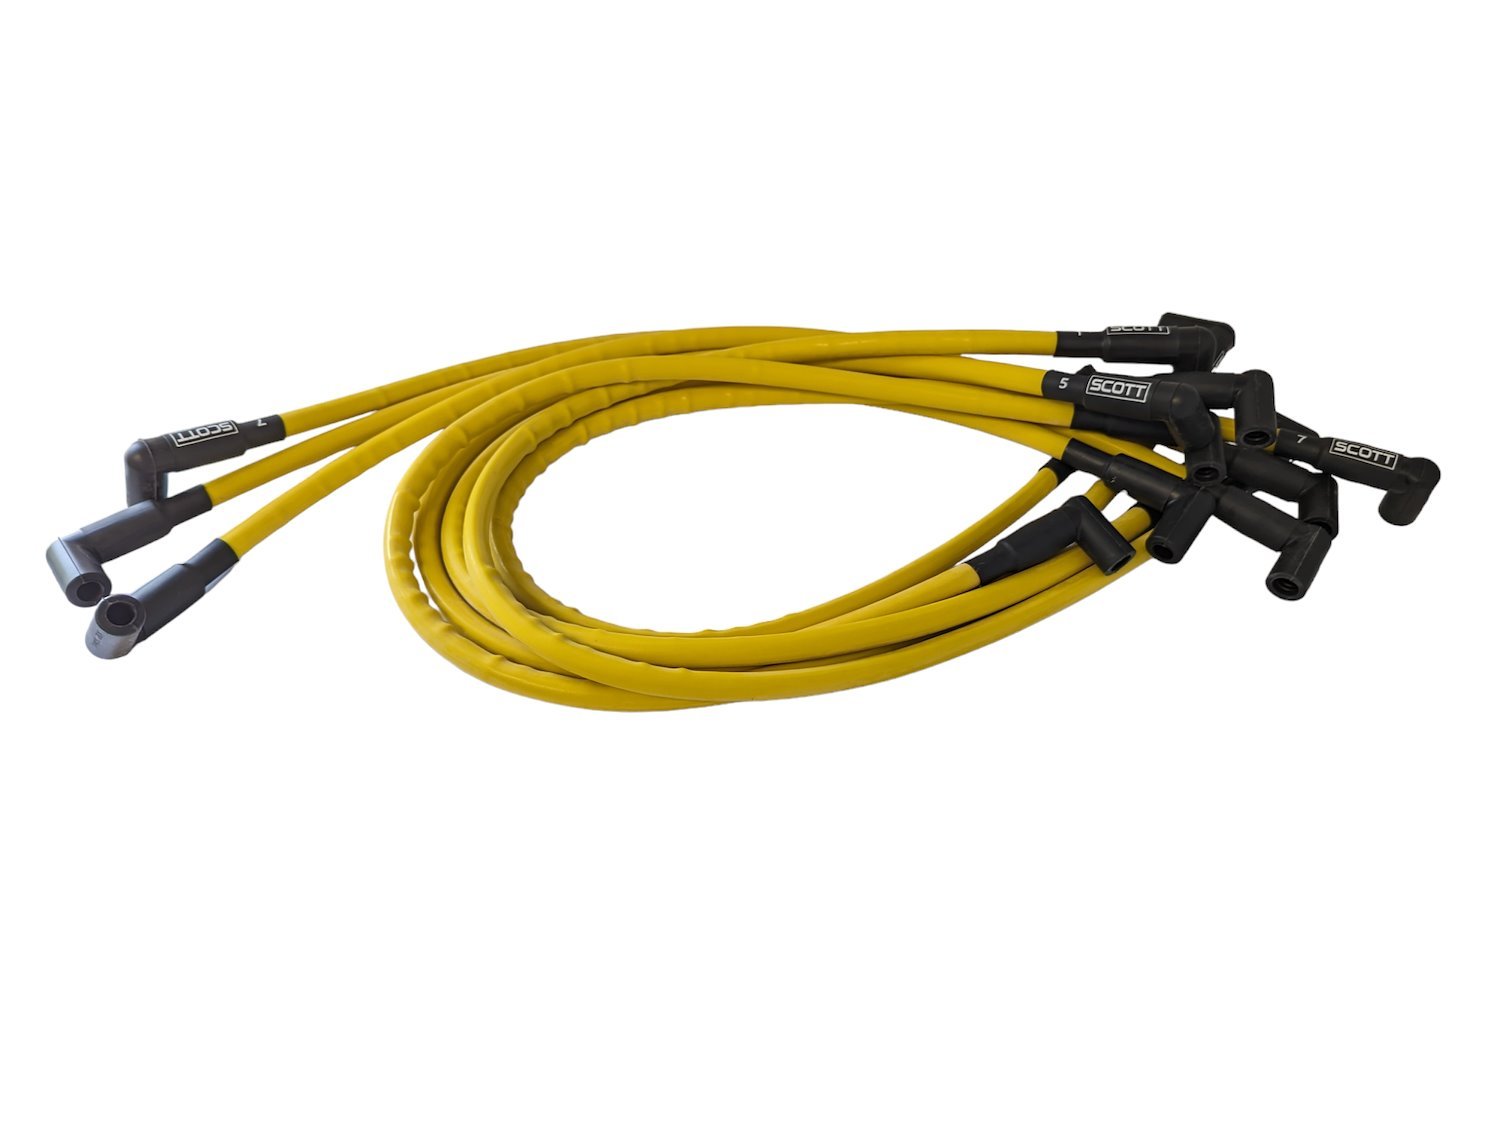 SPW300-CH-516-7 Super Mag Fiberglass-Oversleeved Spark Plug Wire Set for Big Block Chevy Dragster, Under Header [Yellow]